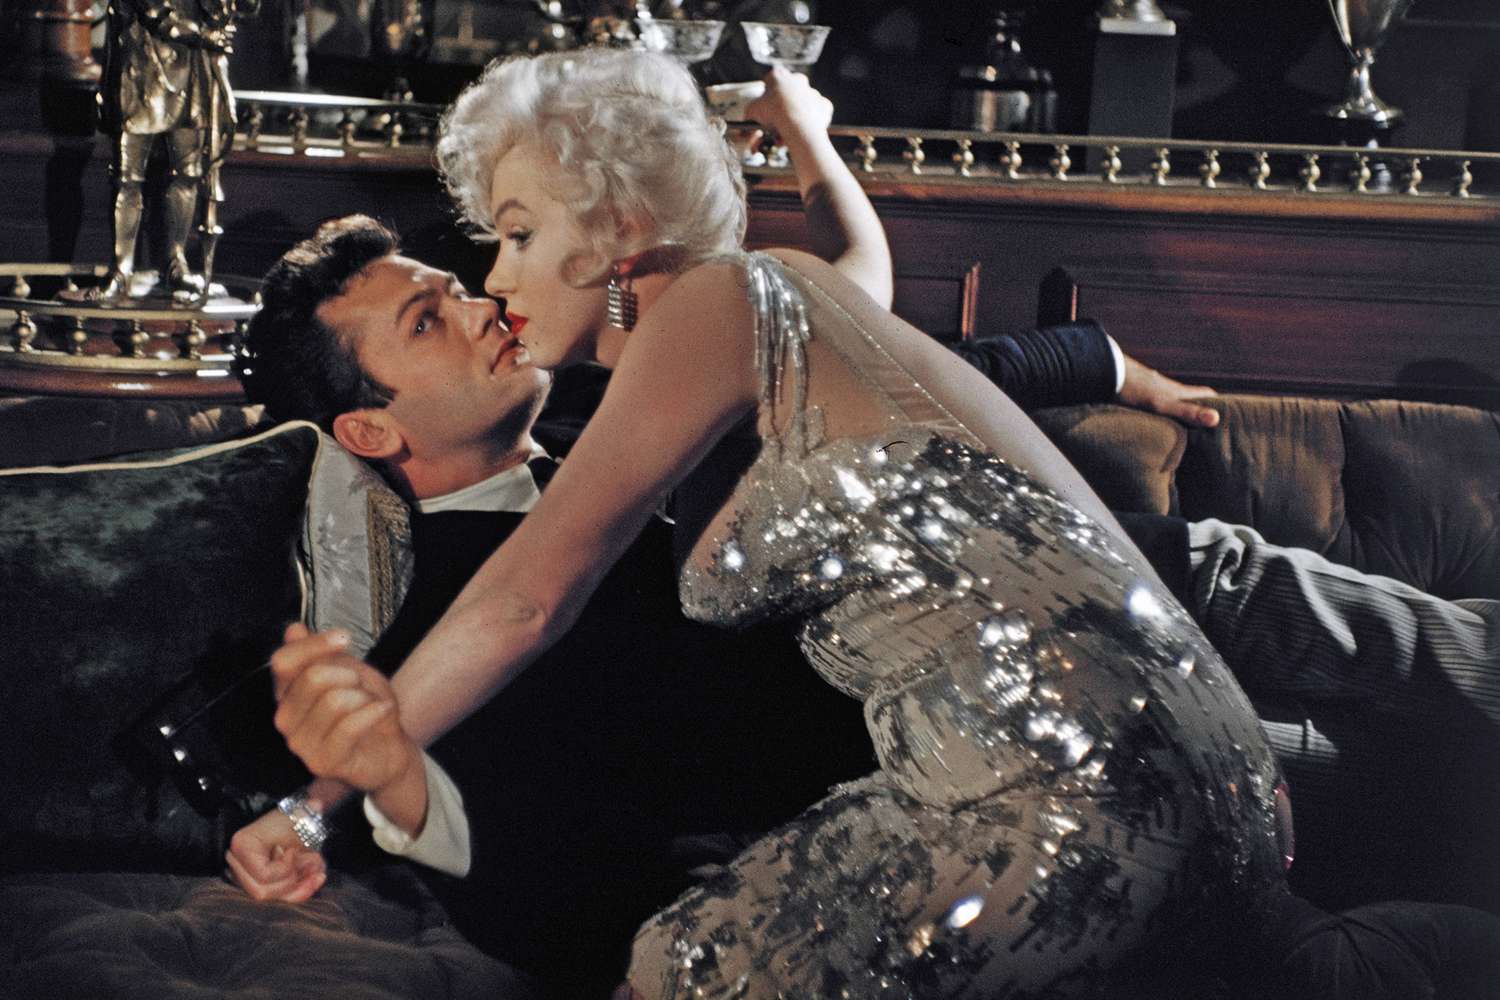 LOS ANGELES - 1958: Actors Marilyn Monroe and Tony Curtis on the set of the film &quot;Some Like it Hot&quot; in Los Angeles, California. (Photo by Richard C. Miller/Donaldson Collection/Getty Images)